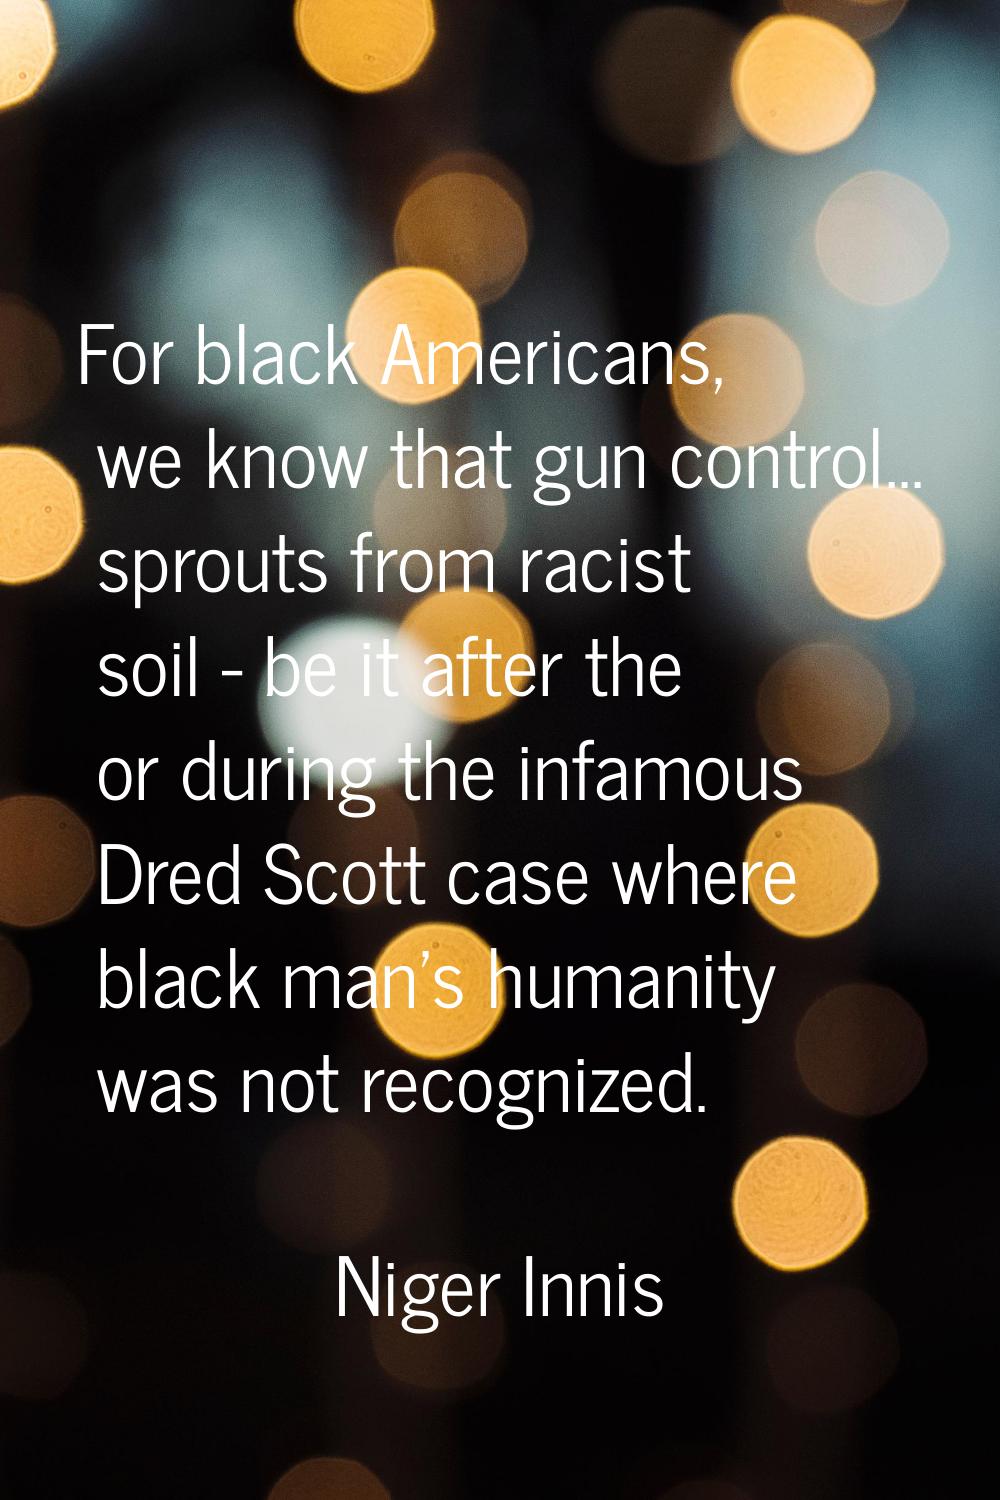 For black Americans, we know that gun control... sprouts from racist soil - be it after the or duri